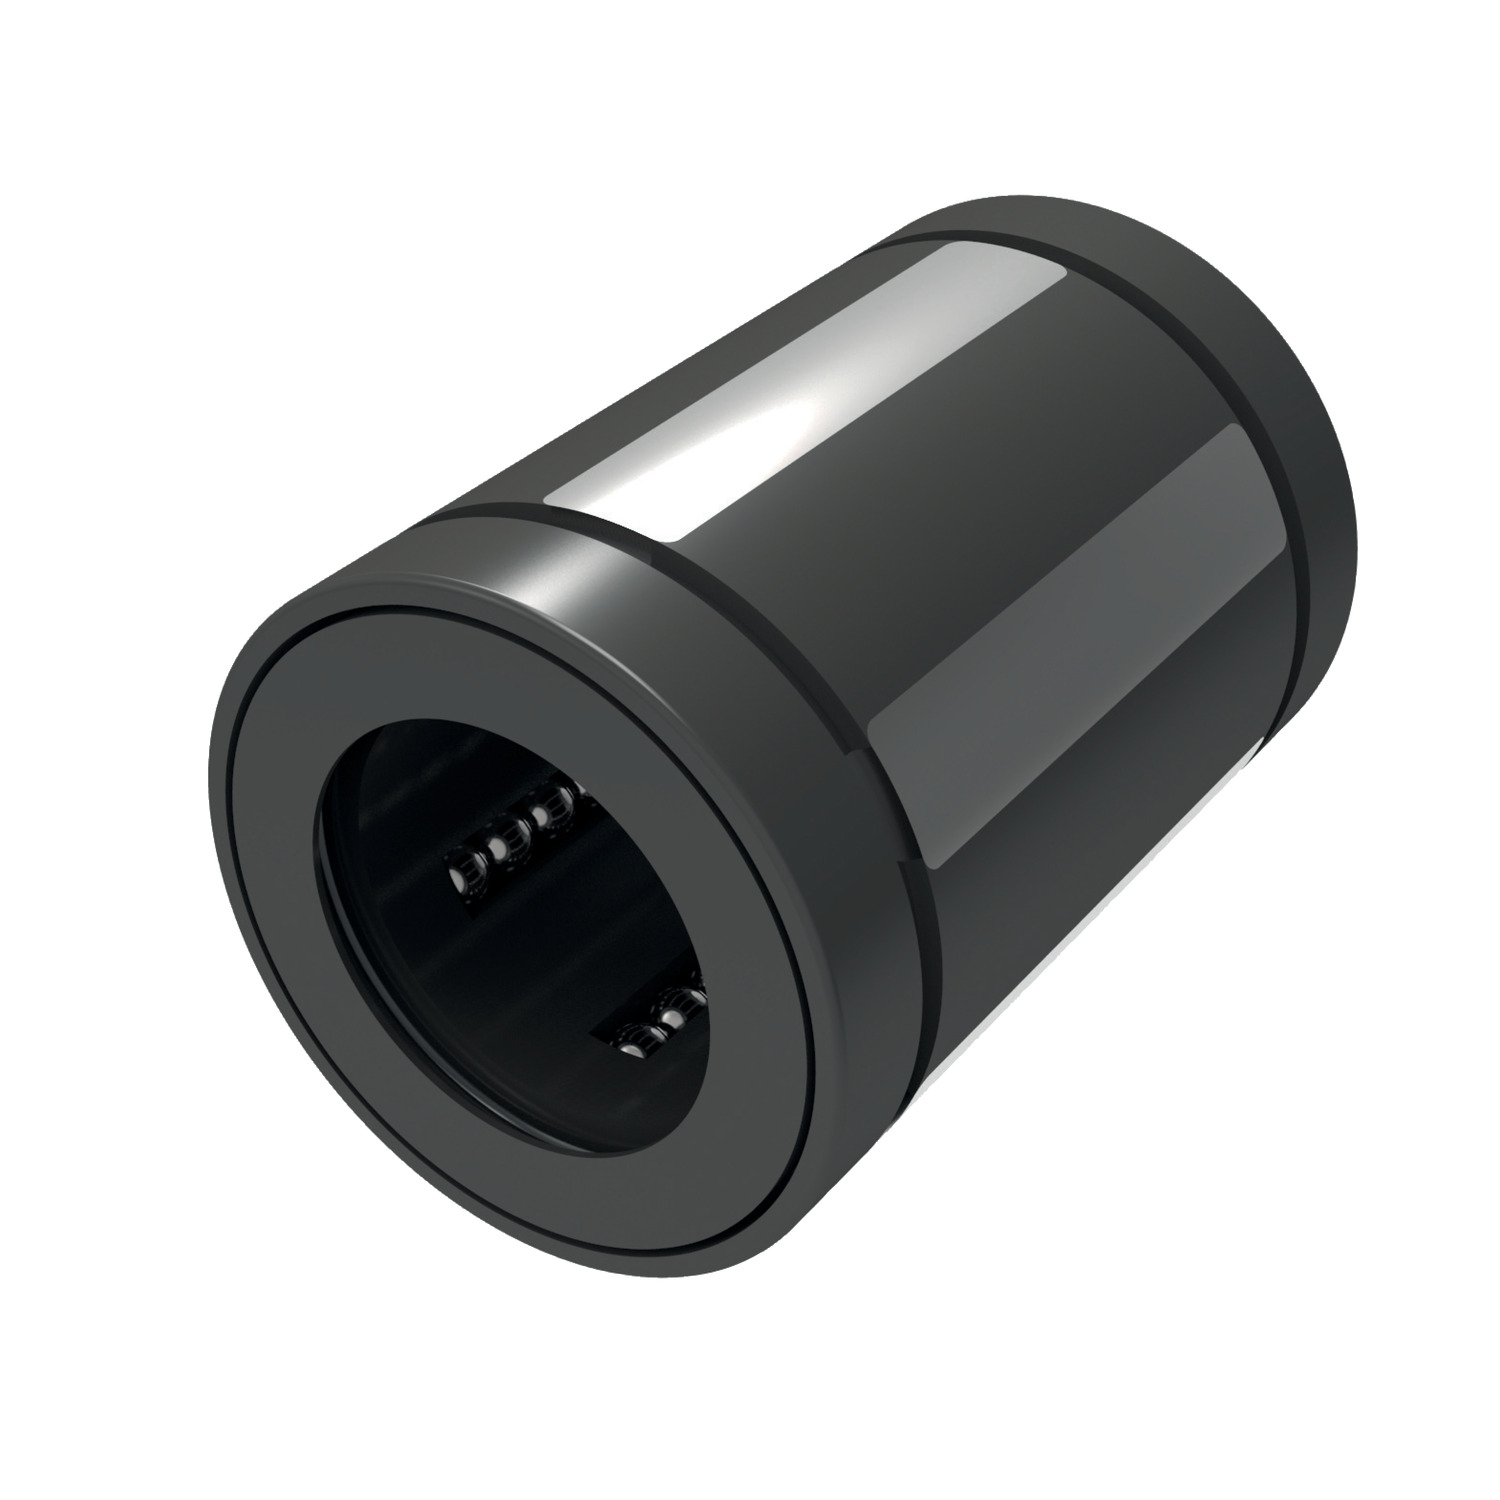 Superball Closed Linear Ball Bushings Superball, Linear Ball Bearings, 10mm to 50mm.